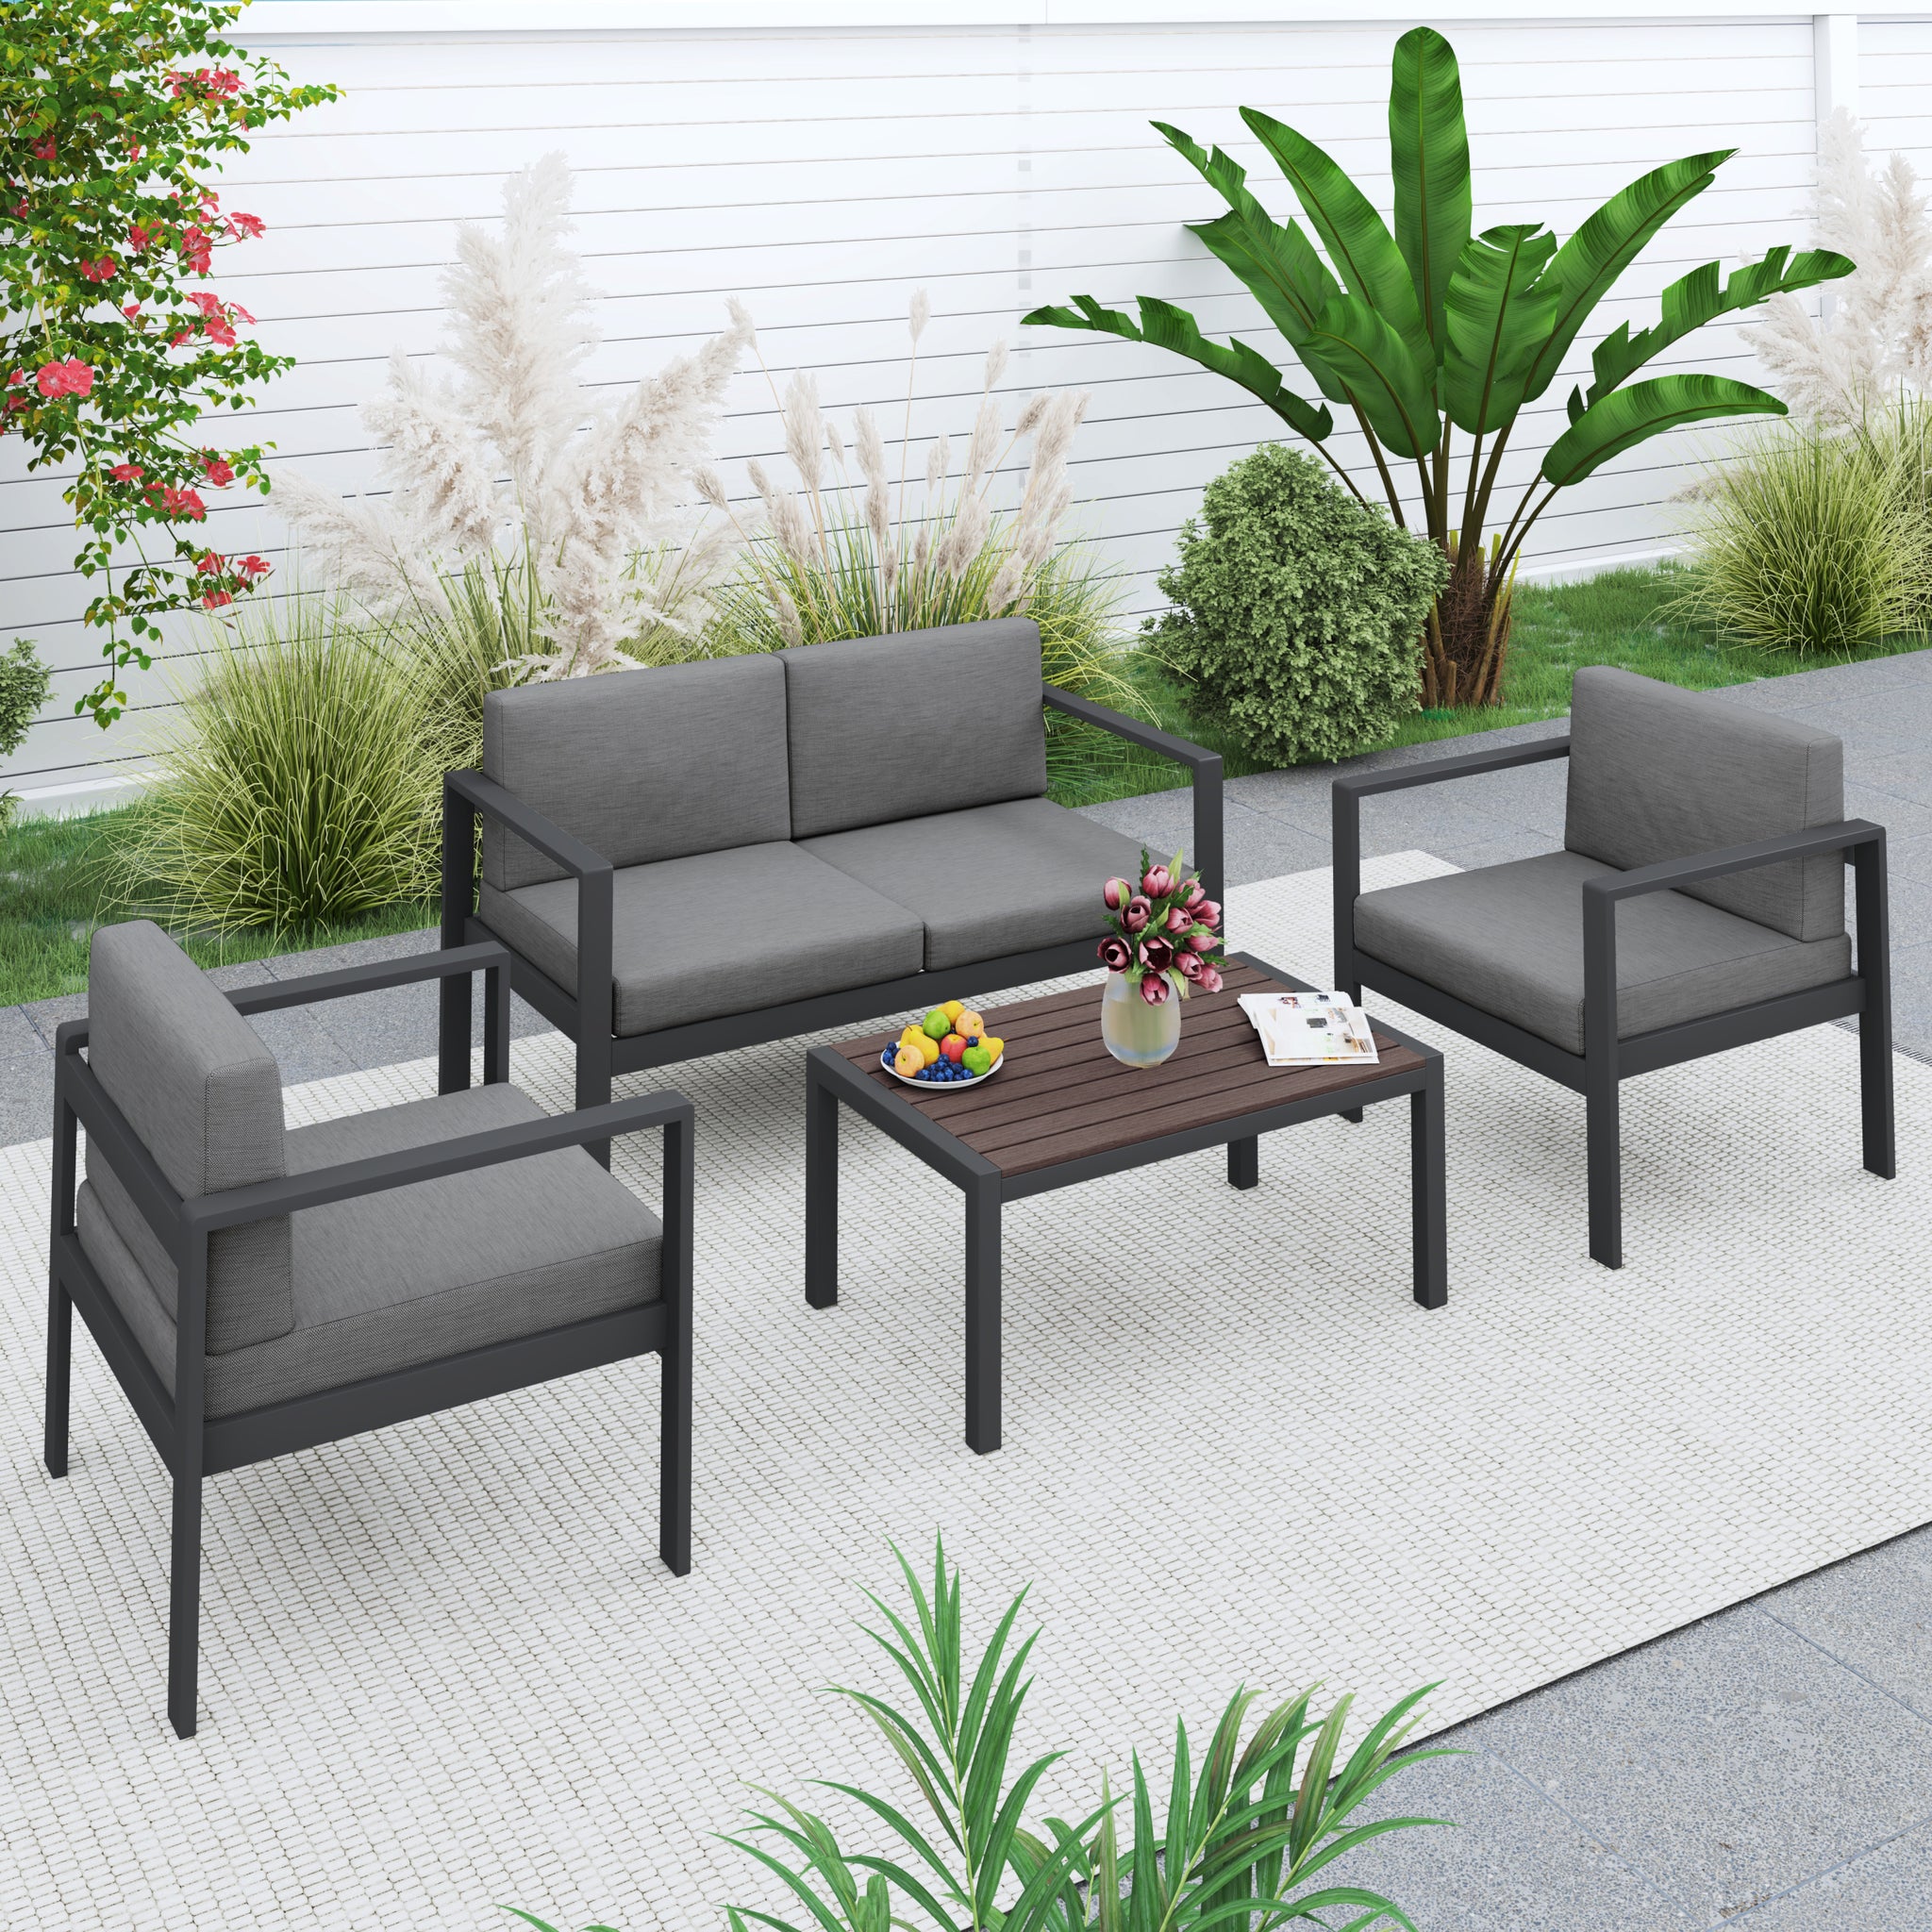 Aluminum Modern 4 Piece Sofa Seating Group For Patio yes-complete patio set-black-mildew resistant